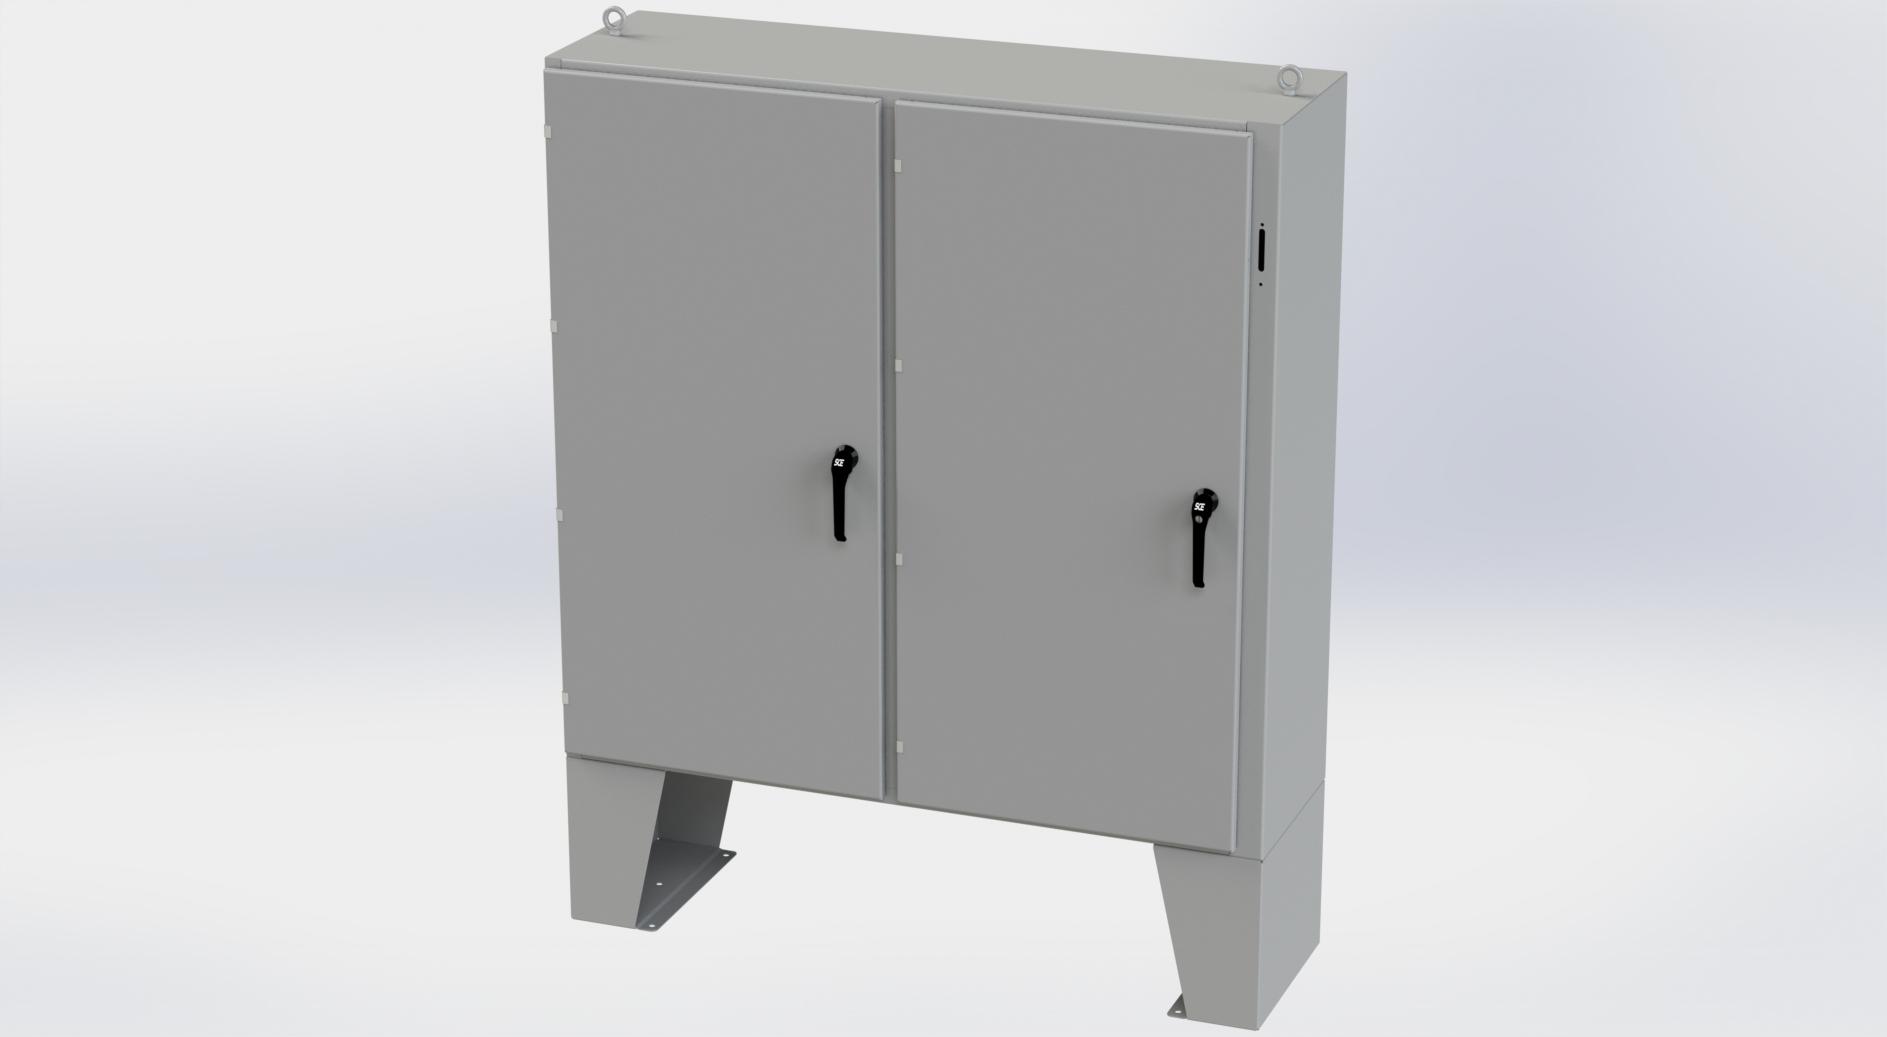 Saginaw Control SCE-60XEL6118LP 2DR XEL Enclosure, Height:60.00", Width:61.00", Depth:18.00", ANSI-61 gray powder coating inside and out. Optional sub-panels are powder coated white.